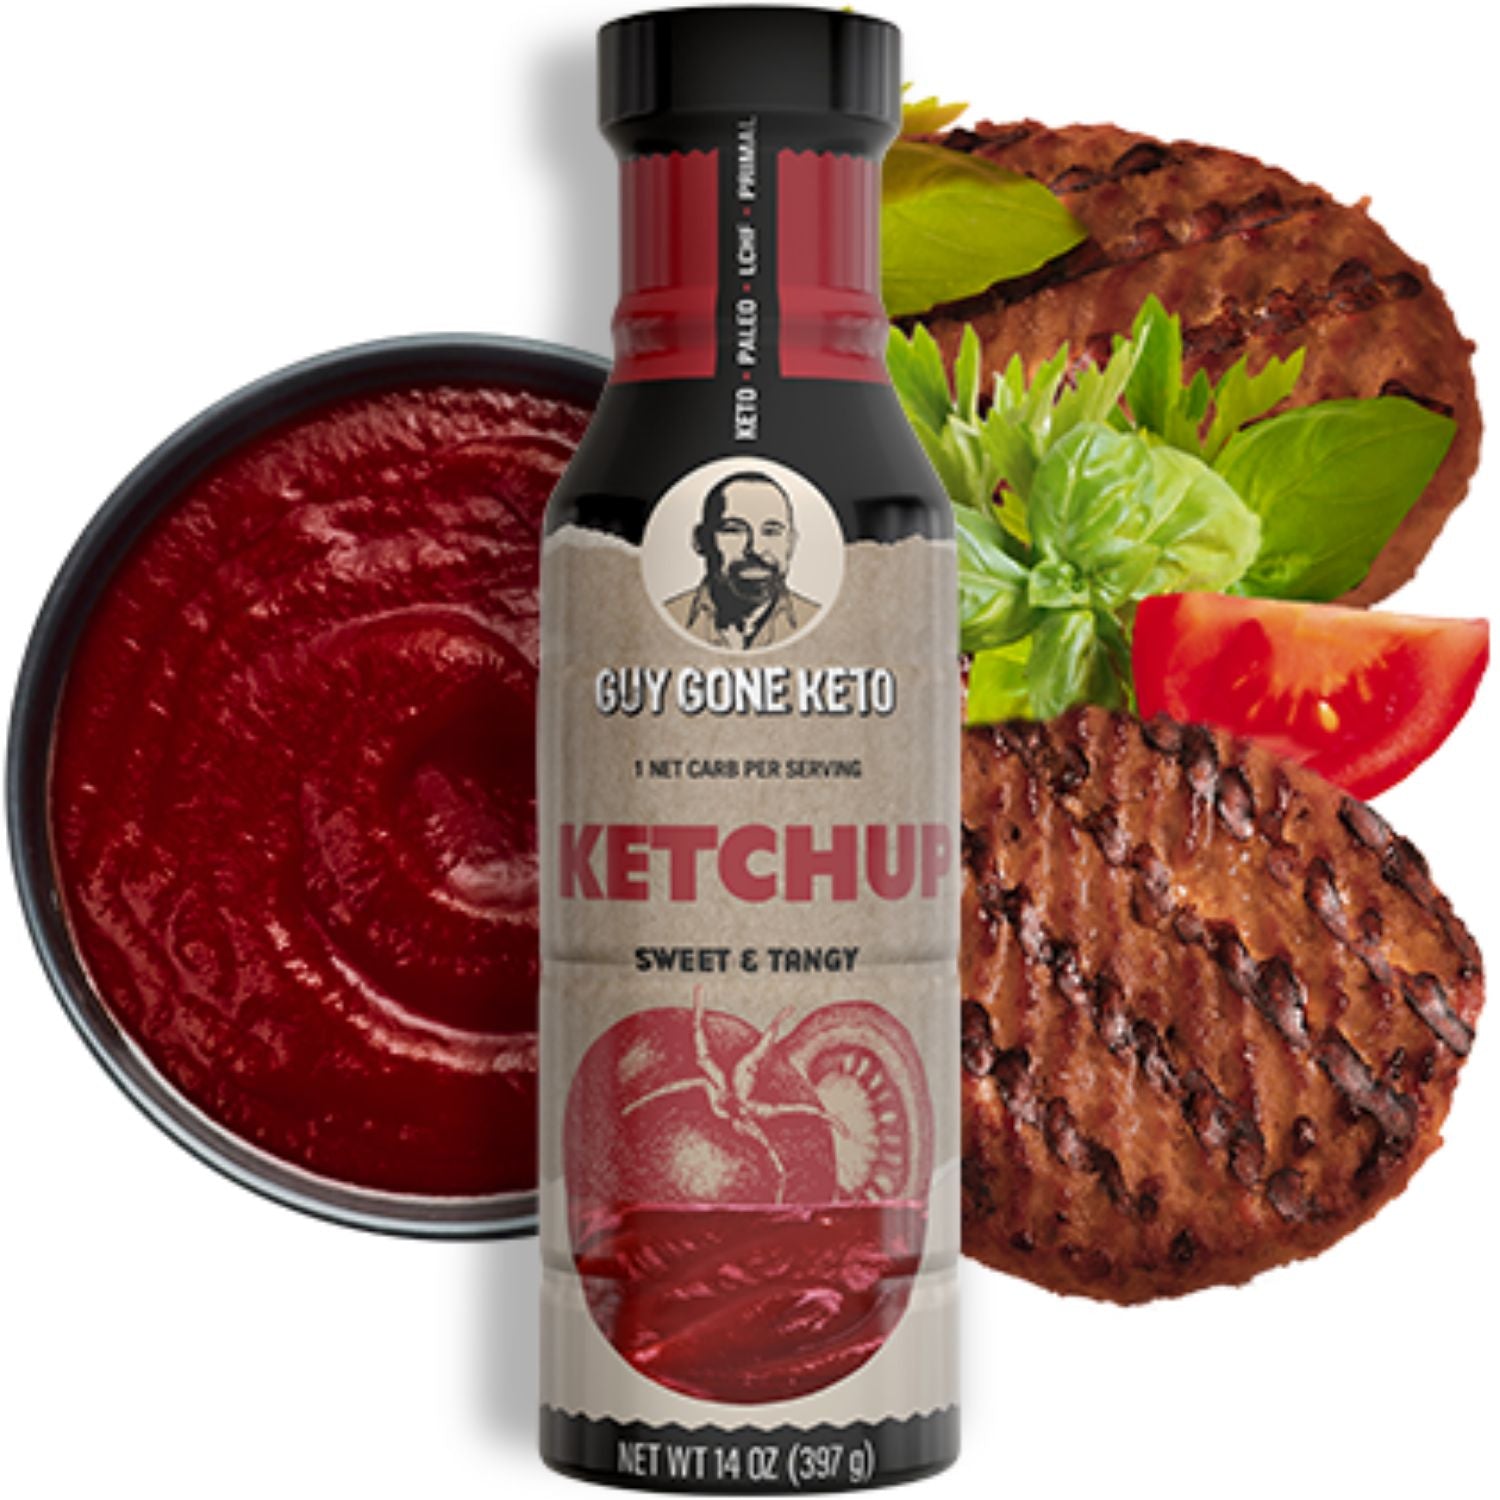 Guy Gone Keto Ketchup, 1G Net Carb, Vegan, Gluten Free with MCT Oil 1 Bottle | Wholesome Provisions